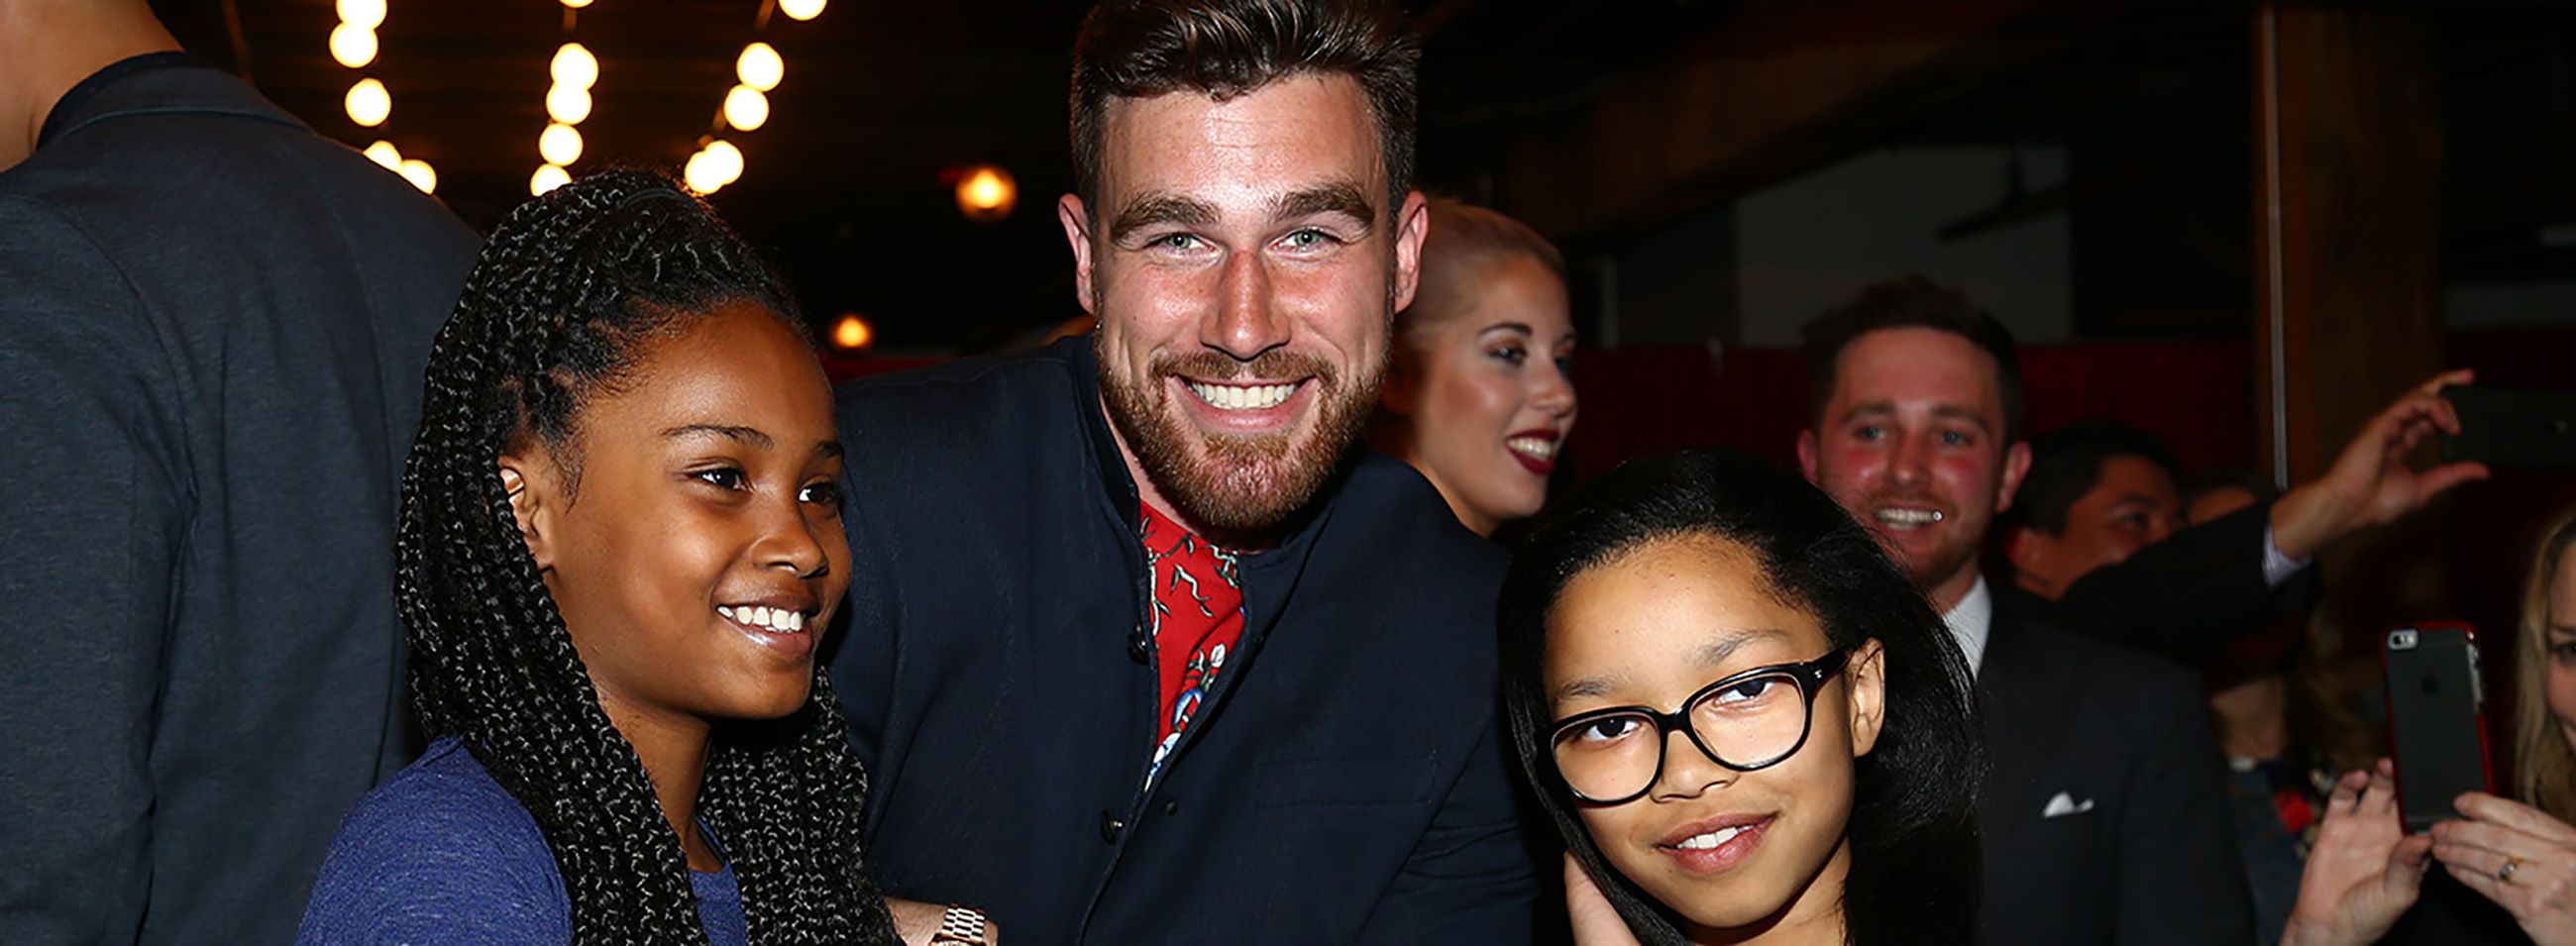 Xx Girl With A Xx Boy A 3g - Travis Kelce and girls at Walk the Walk event | 87 & Running